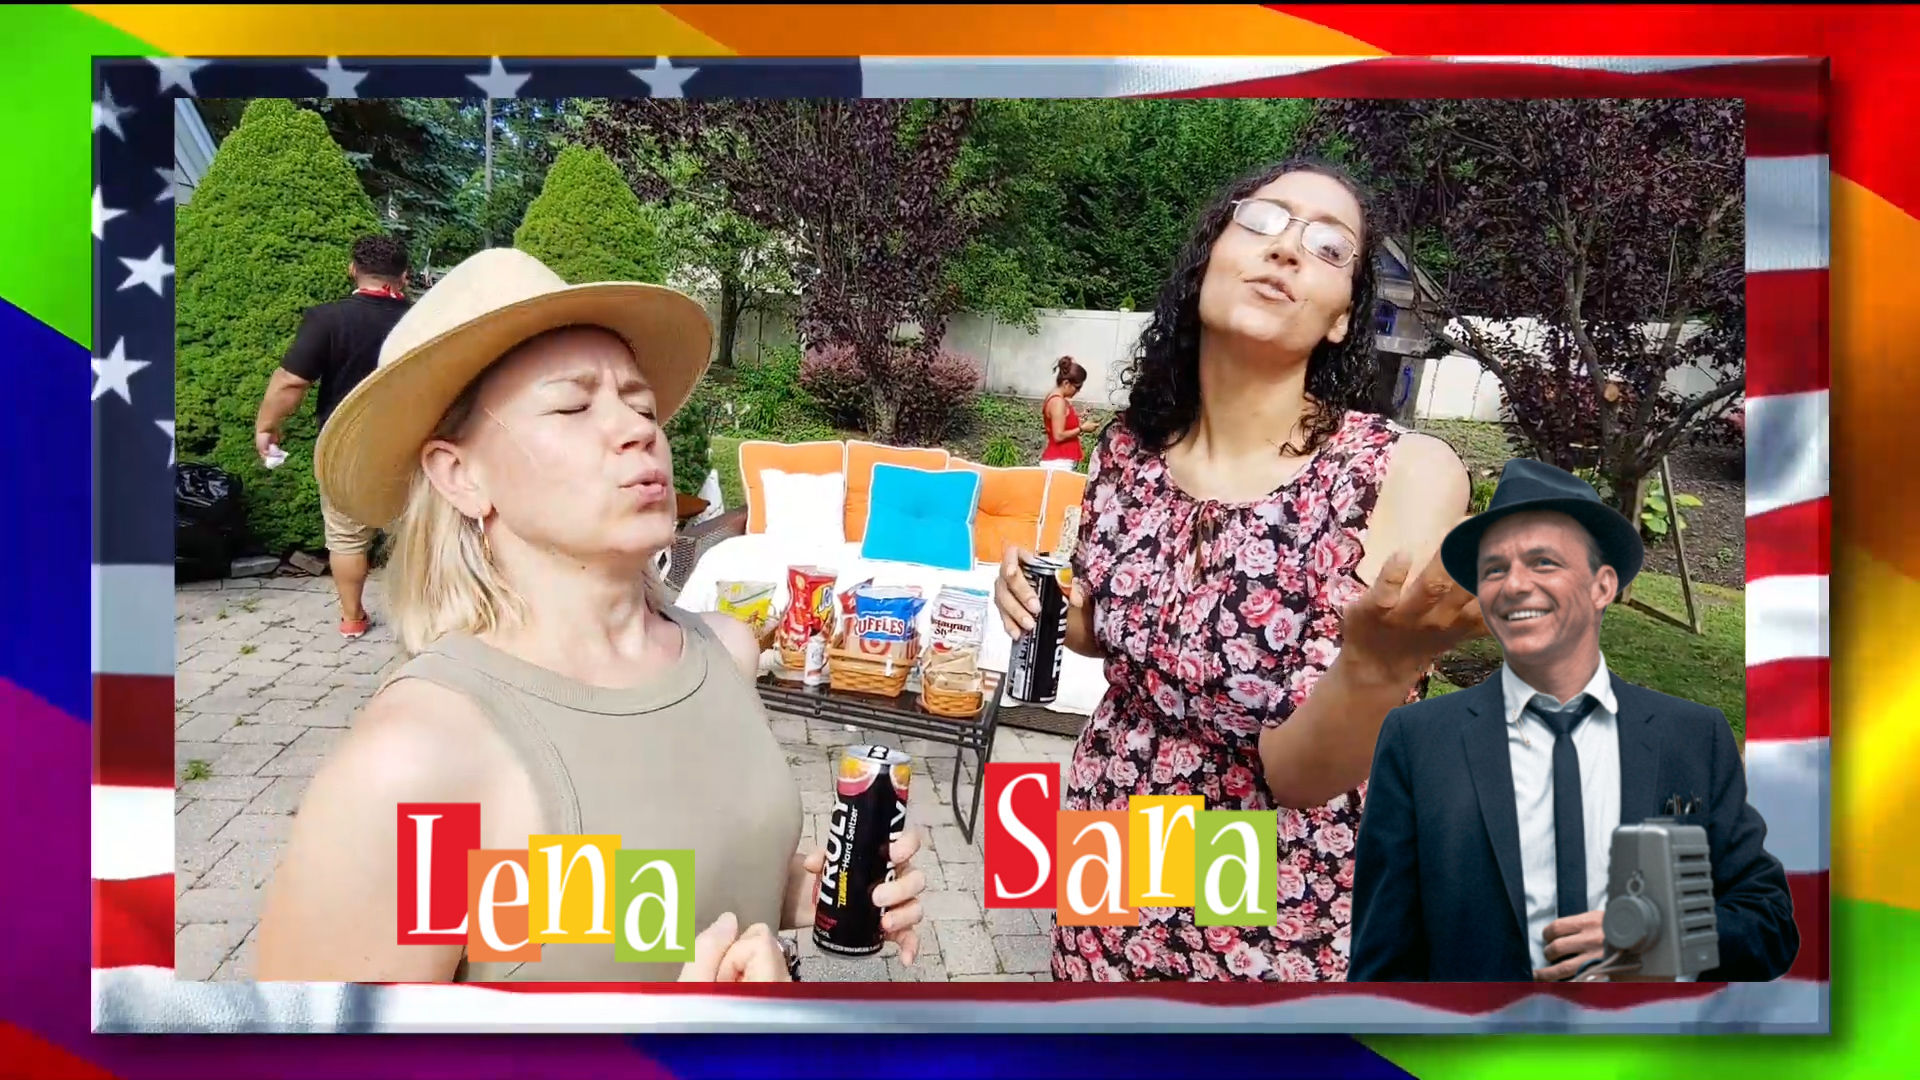 SaraLena: "LiVE!" EP. 102 - July 4th Summer Special!